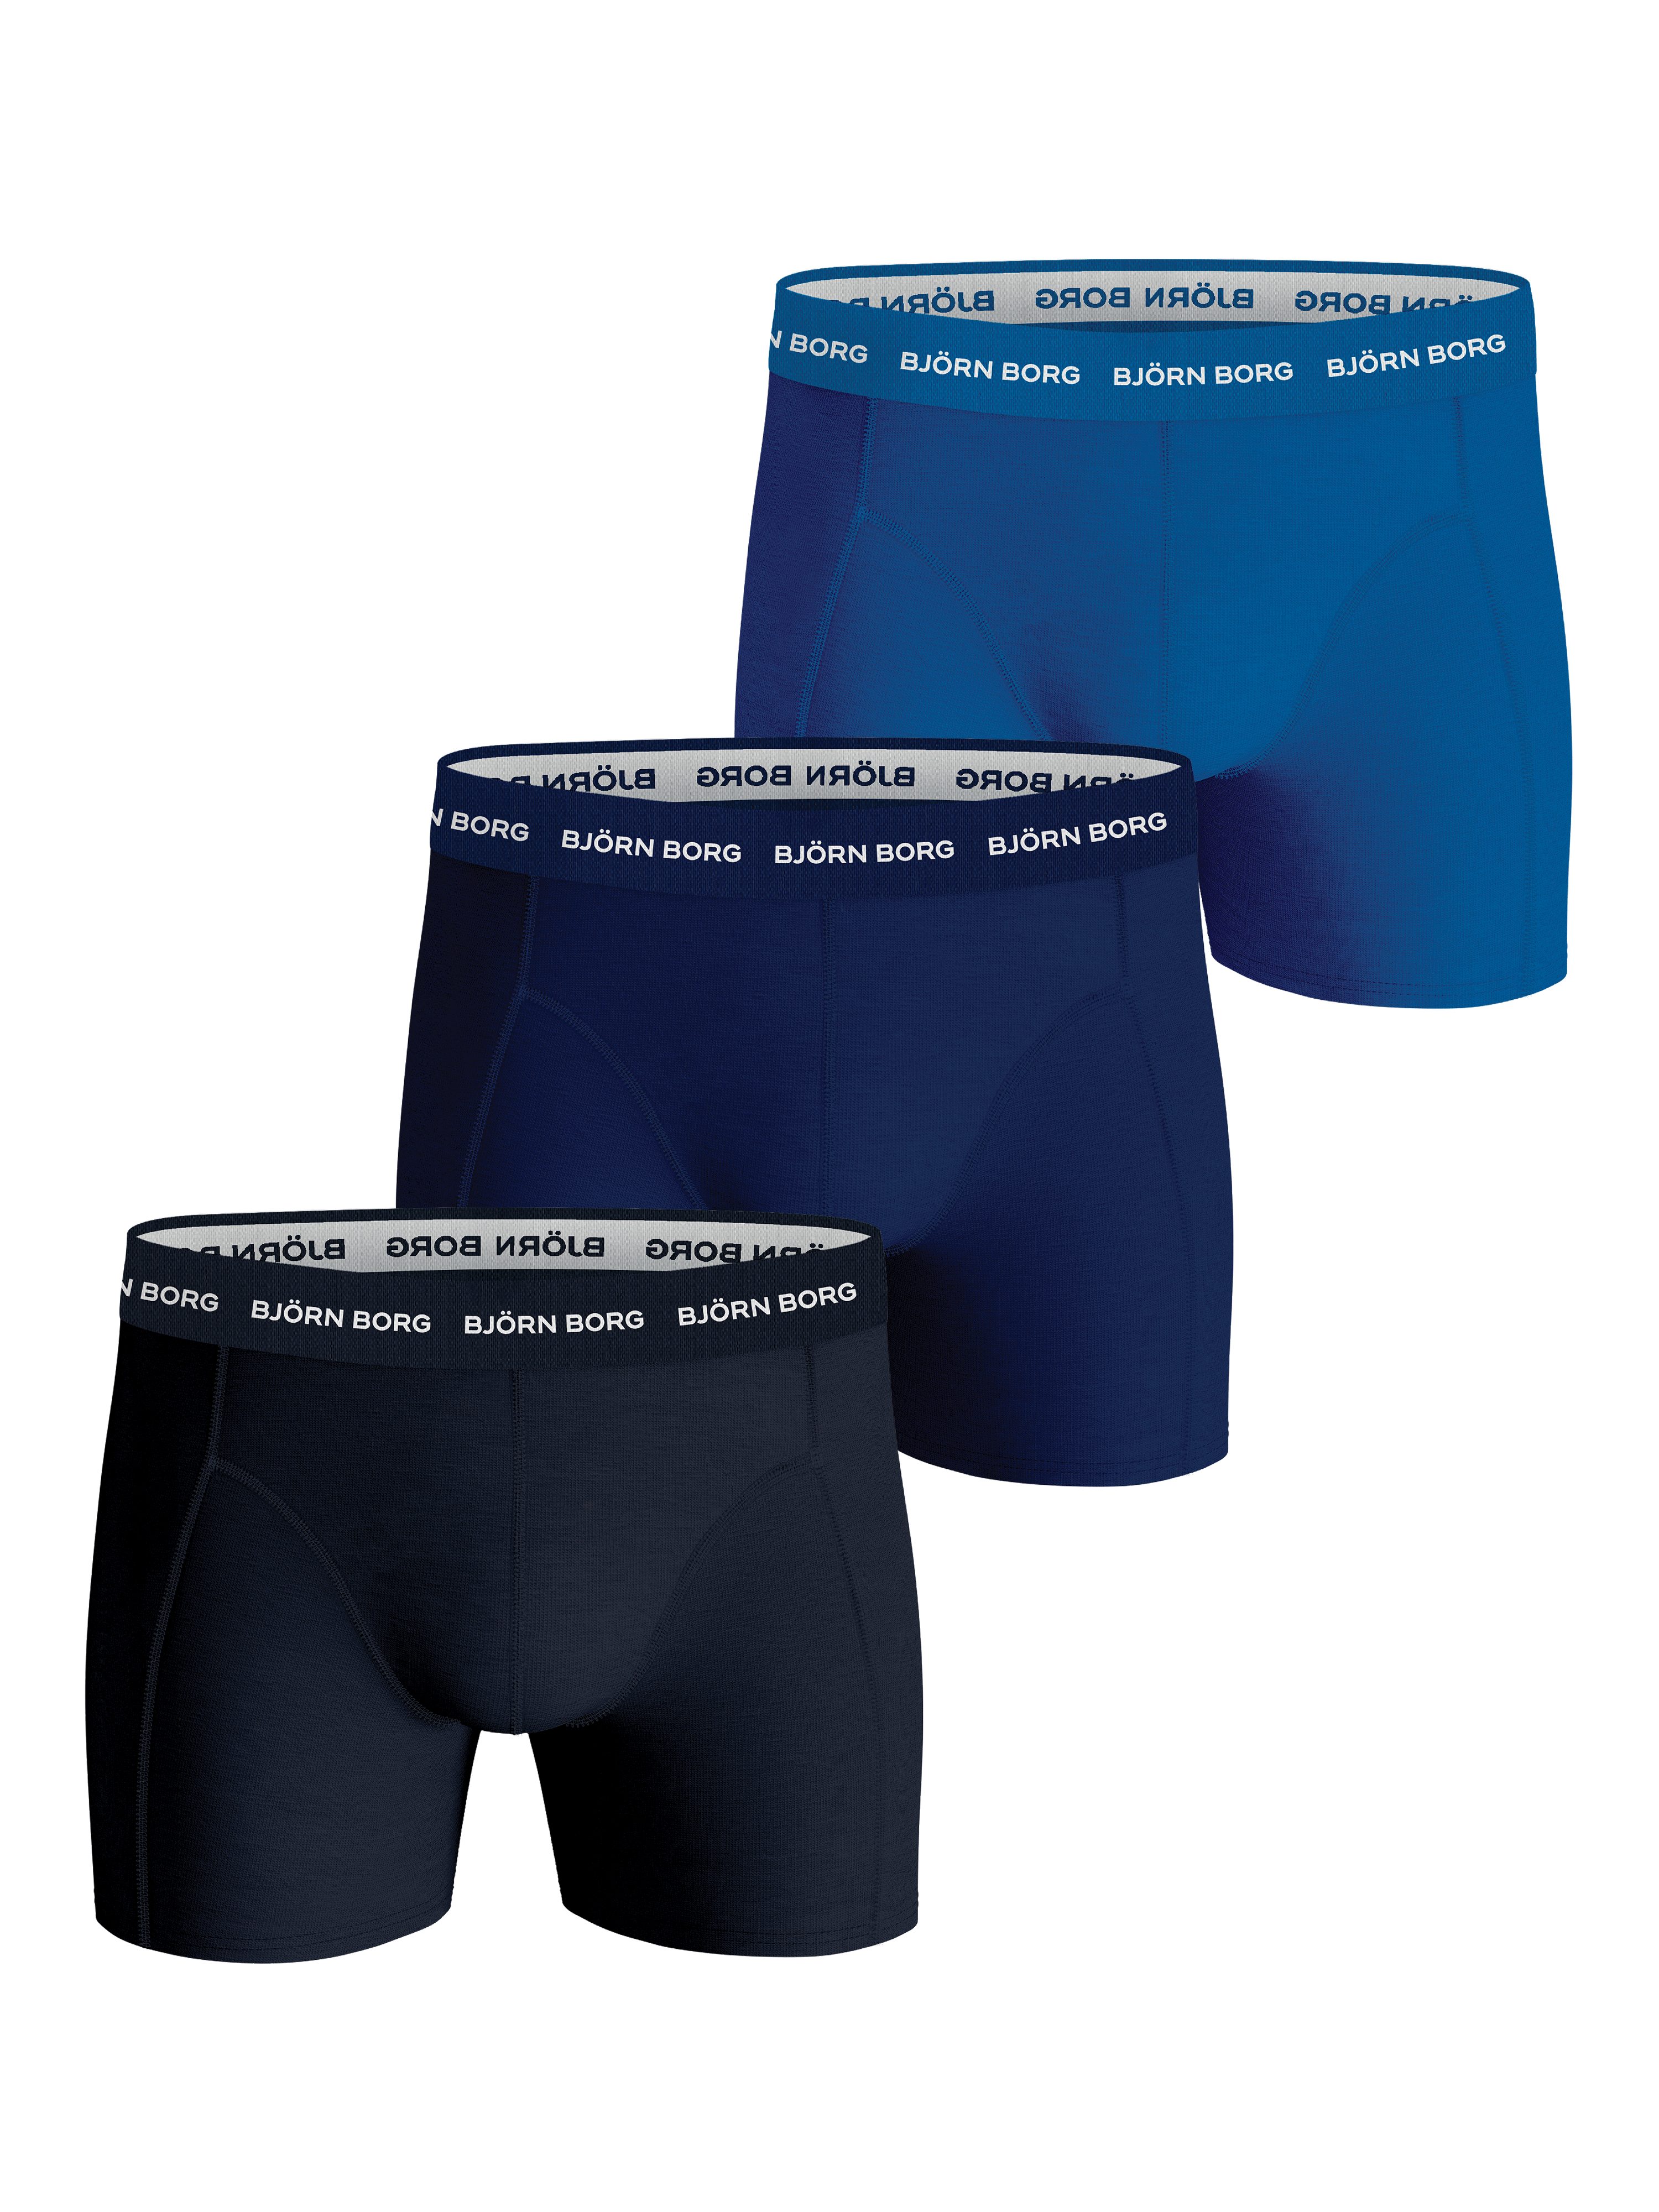 PACK OF 3 TEXTURED BOXERS - various